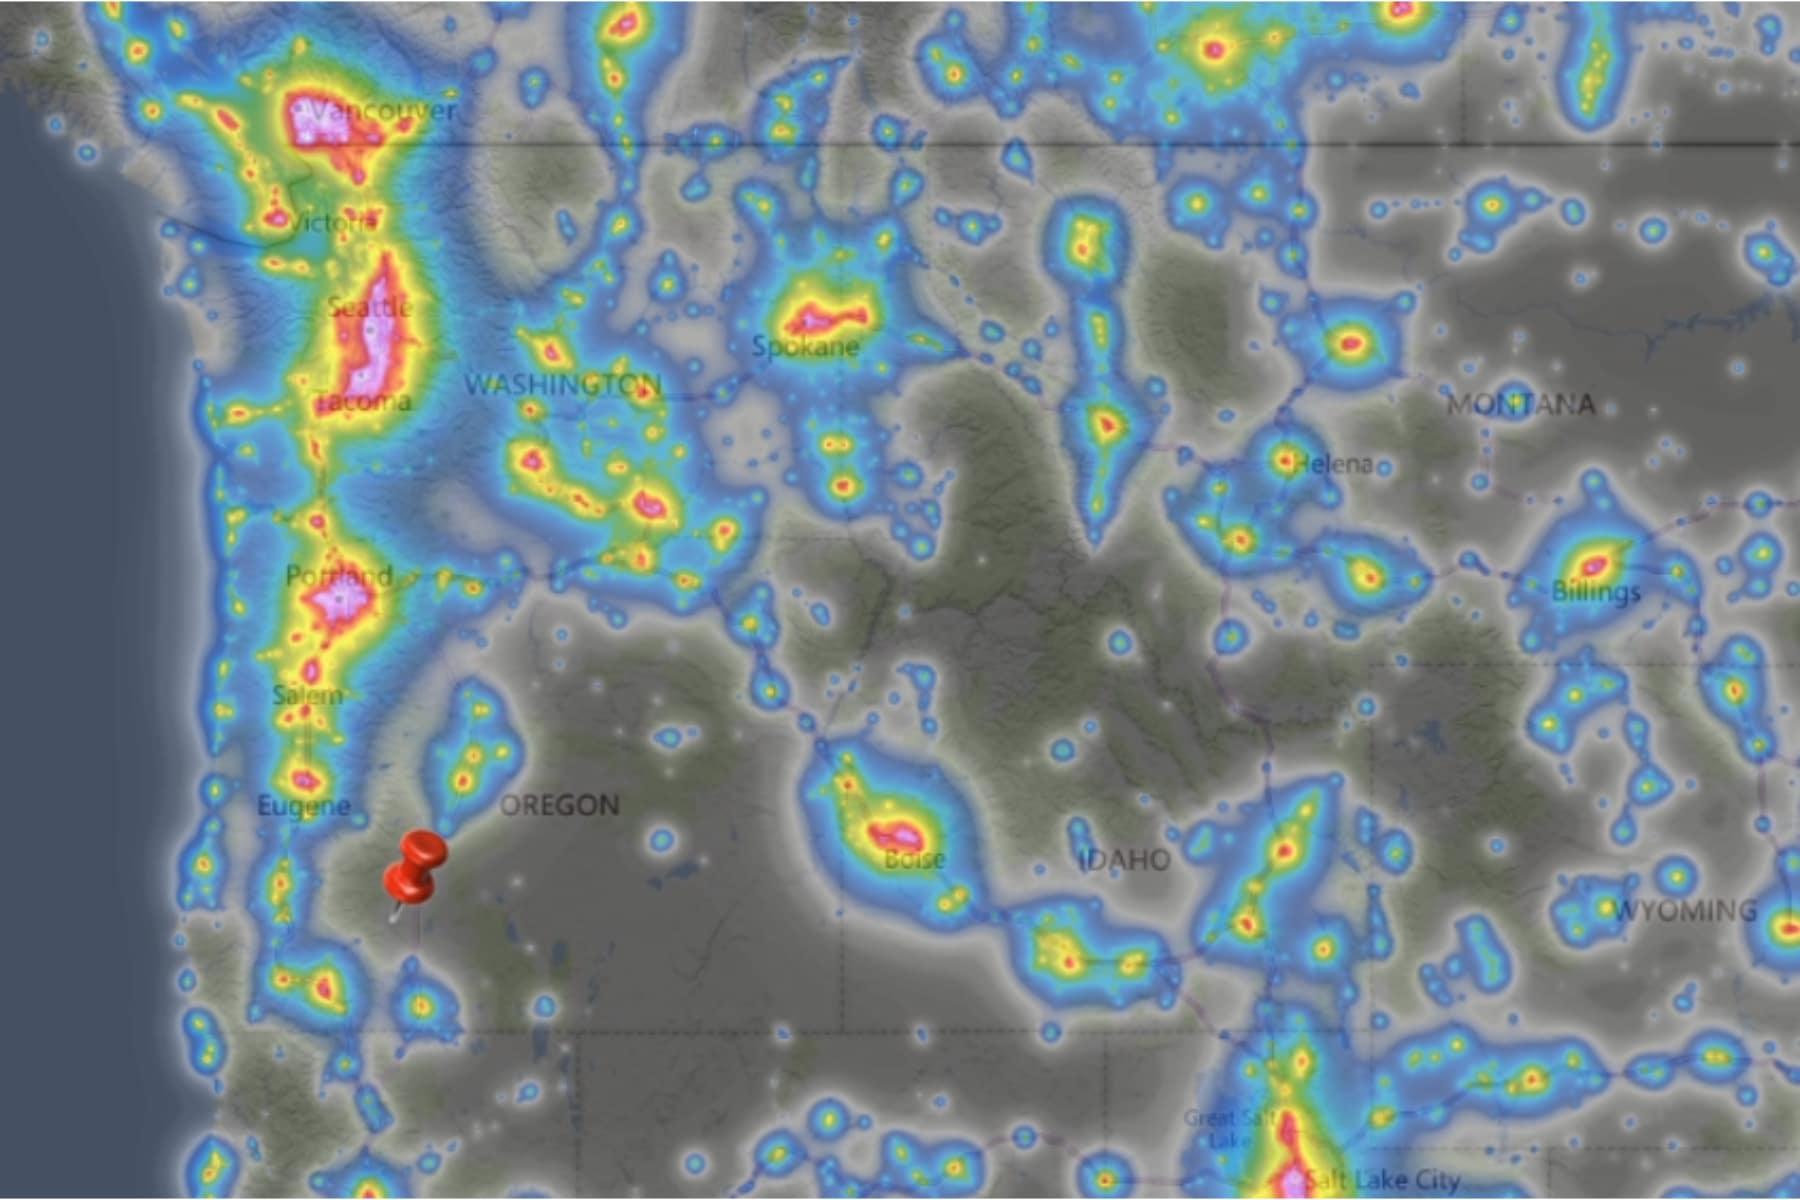 Light pollution map over Pacific Northwest